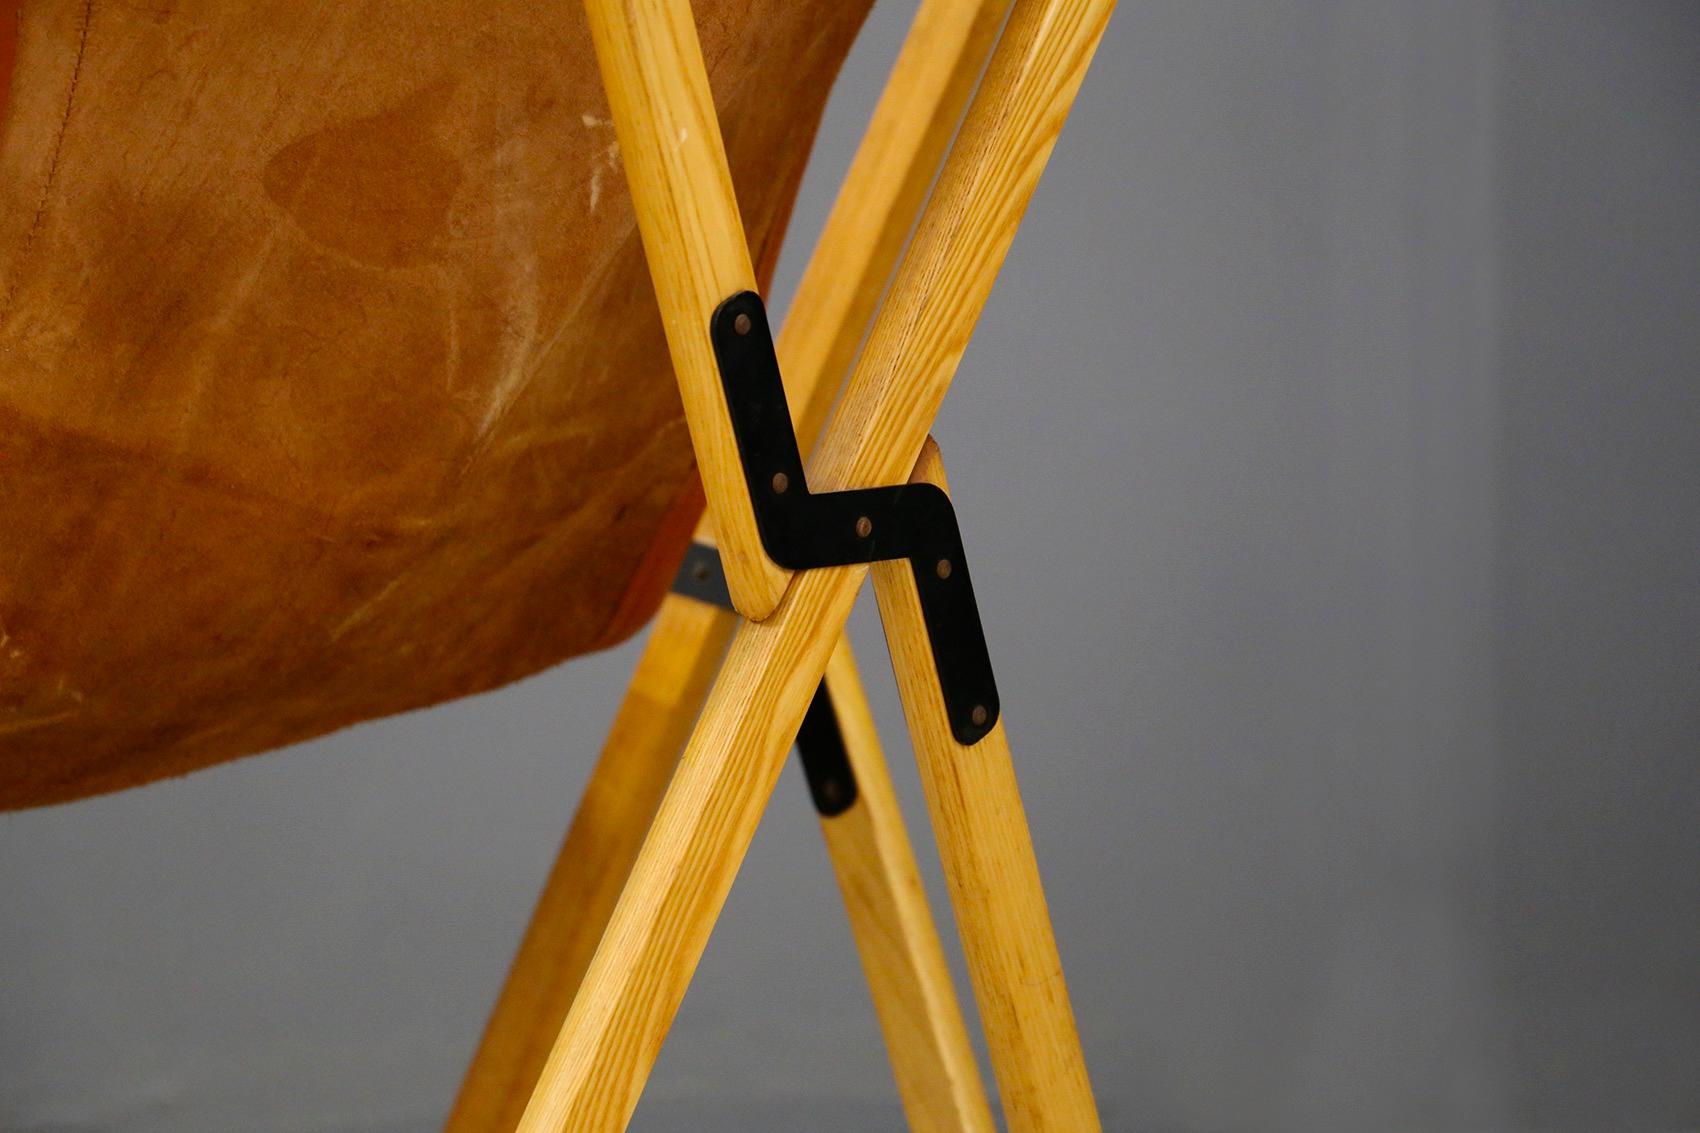 Late 20th Century Tripolina Folding Chair by Viganò in Leather and Teak from circa 1970s